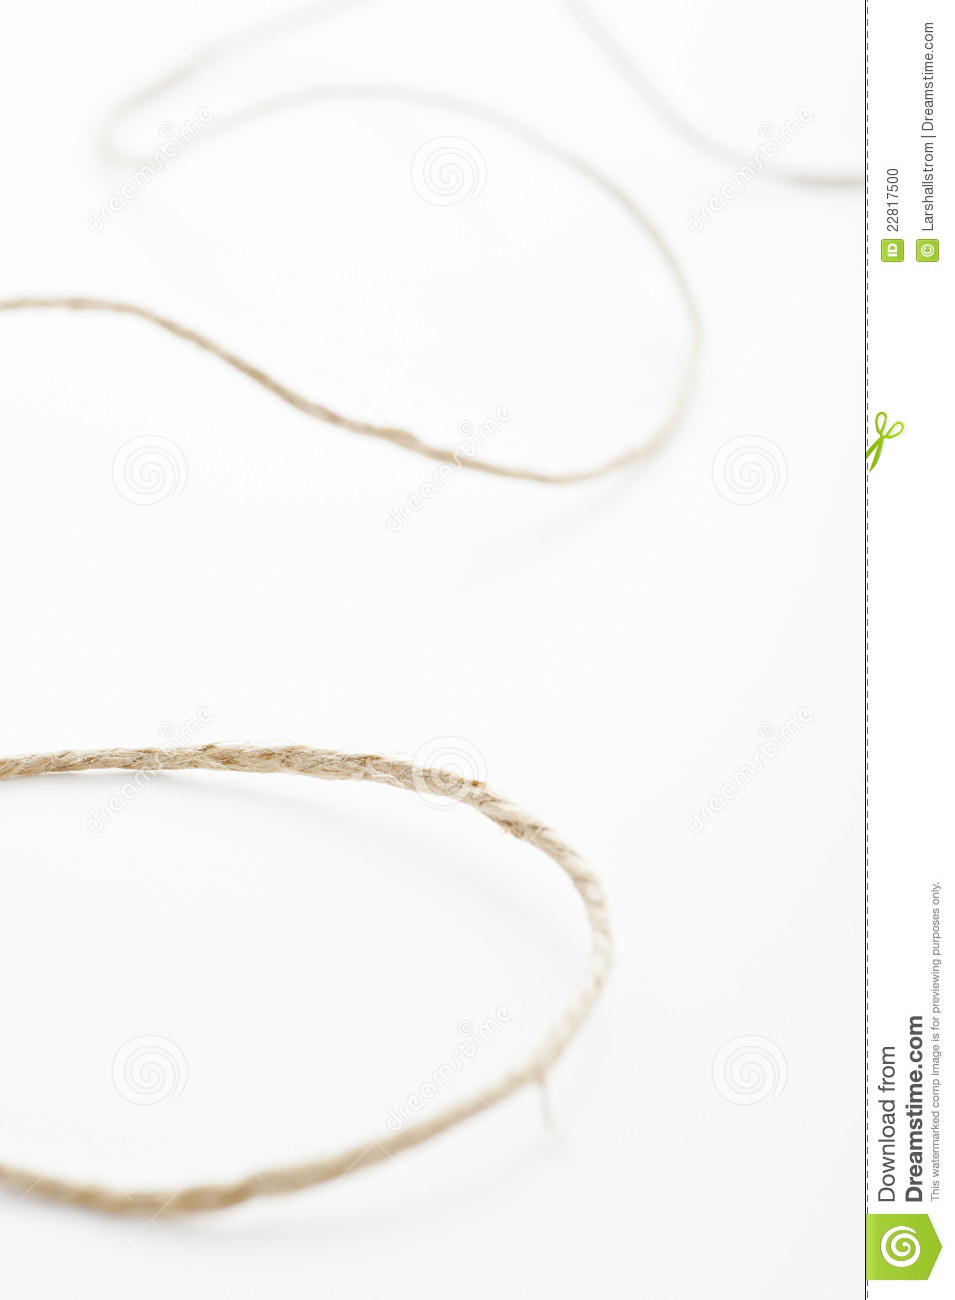 Piece Of Winding String Stock Photo   Image  22817500